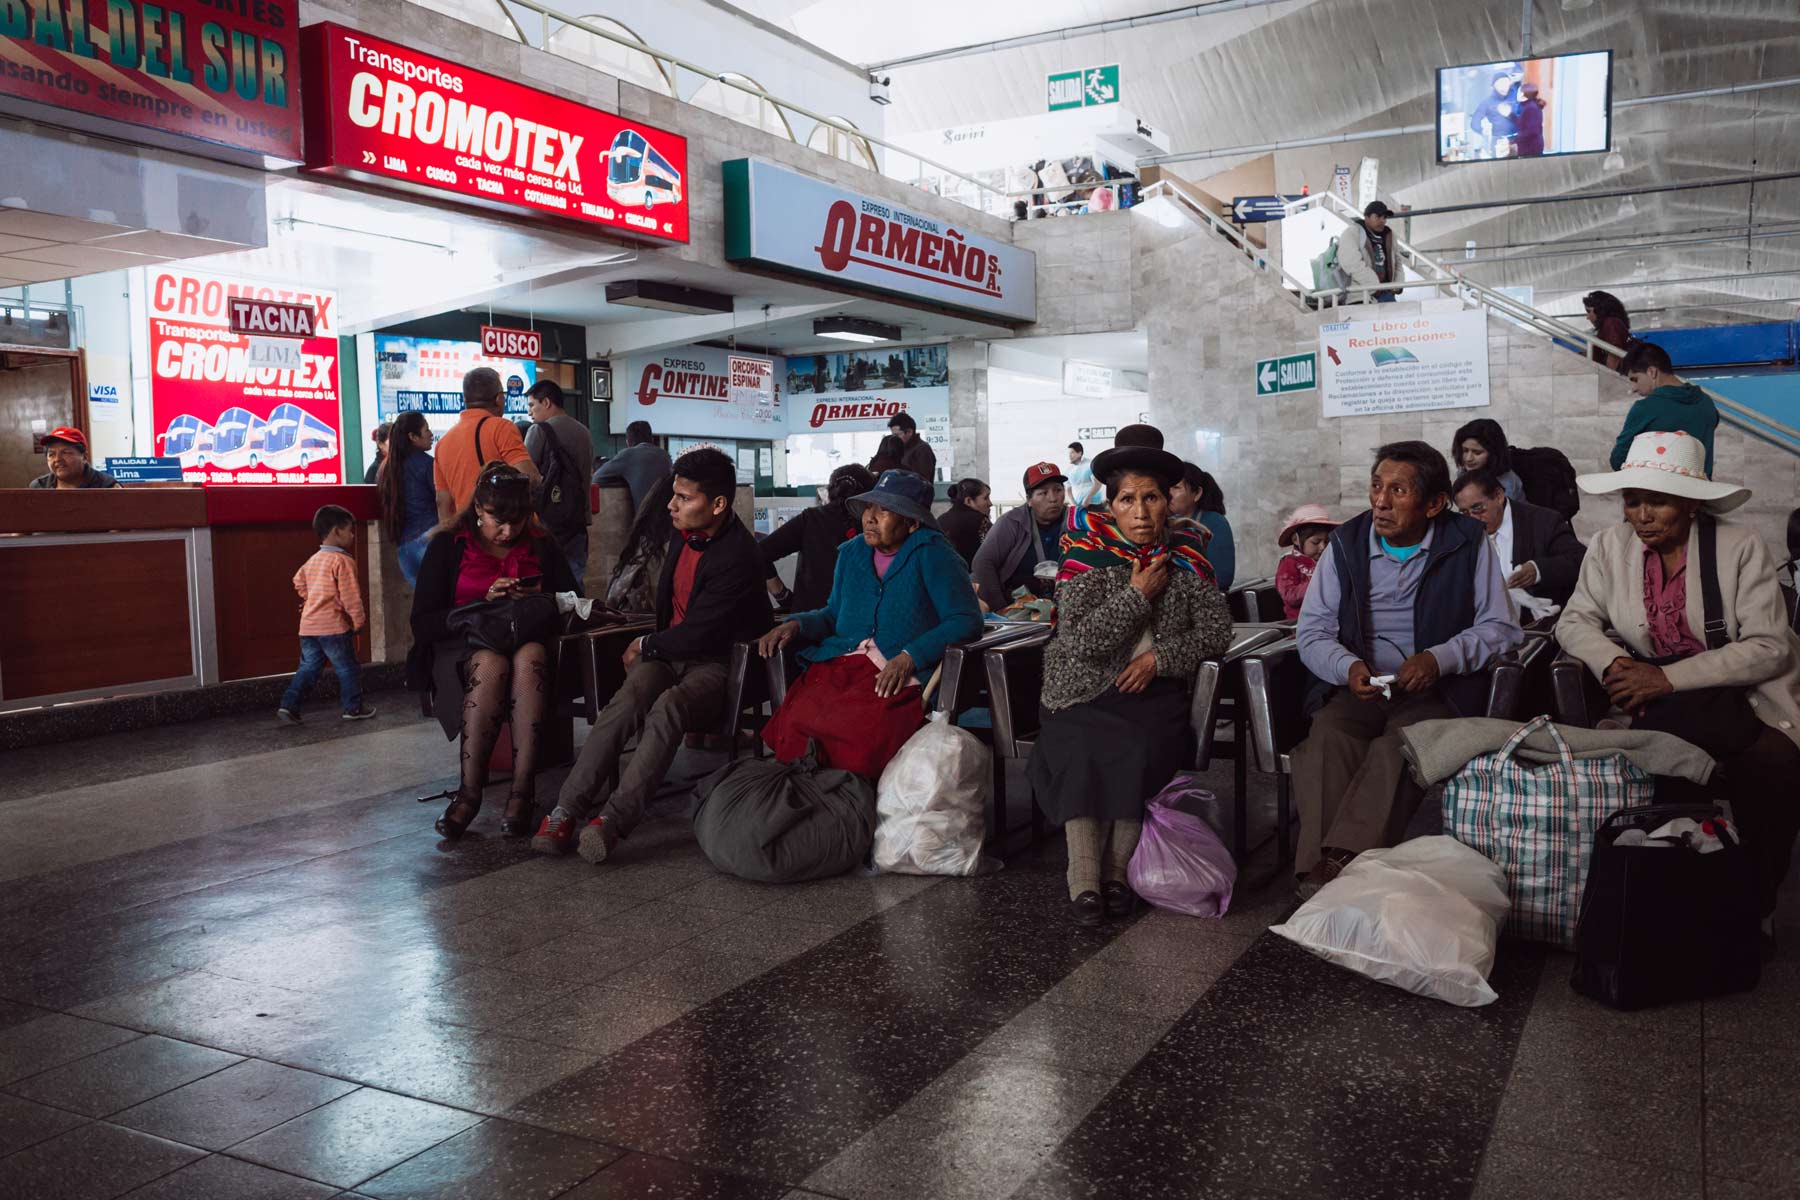 Passengers waiting for their long distance bus in Arequipa.